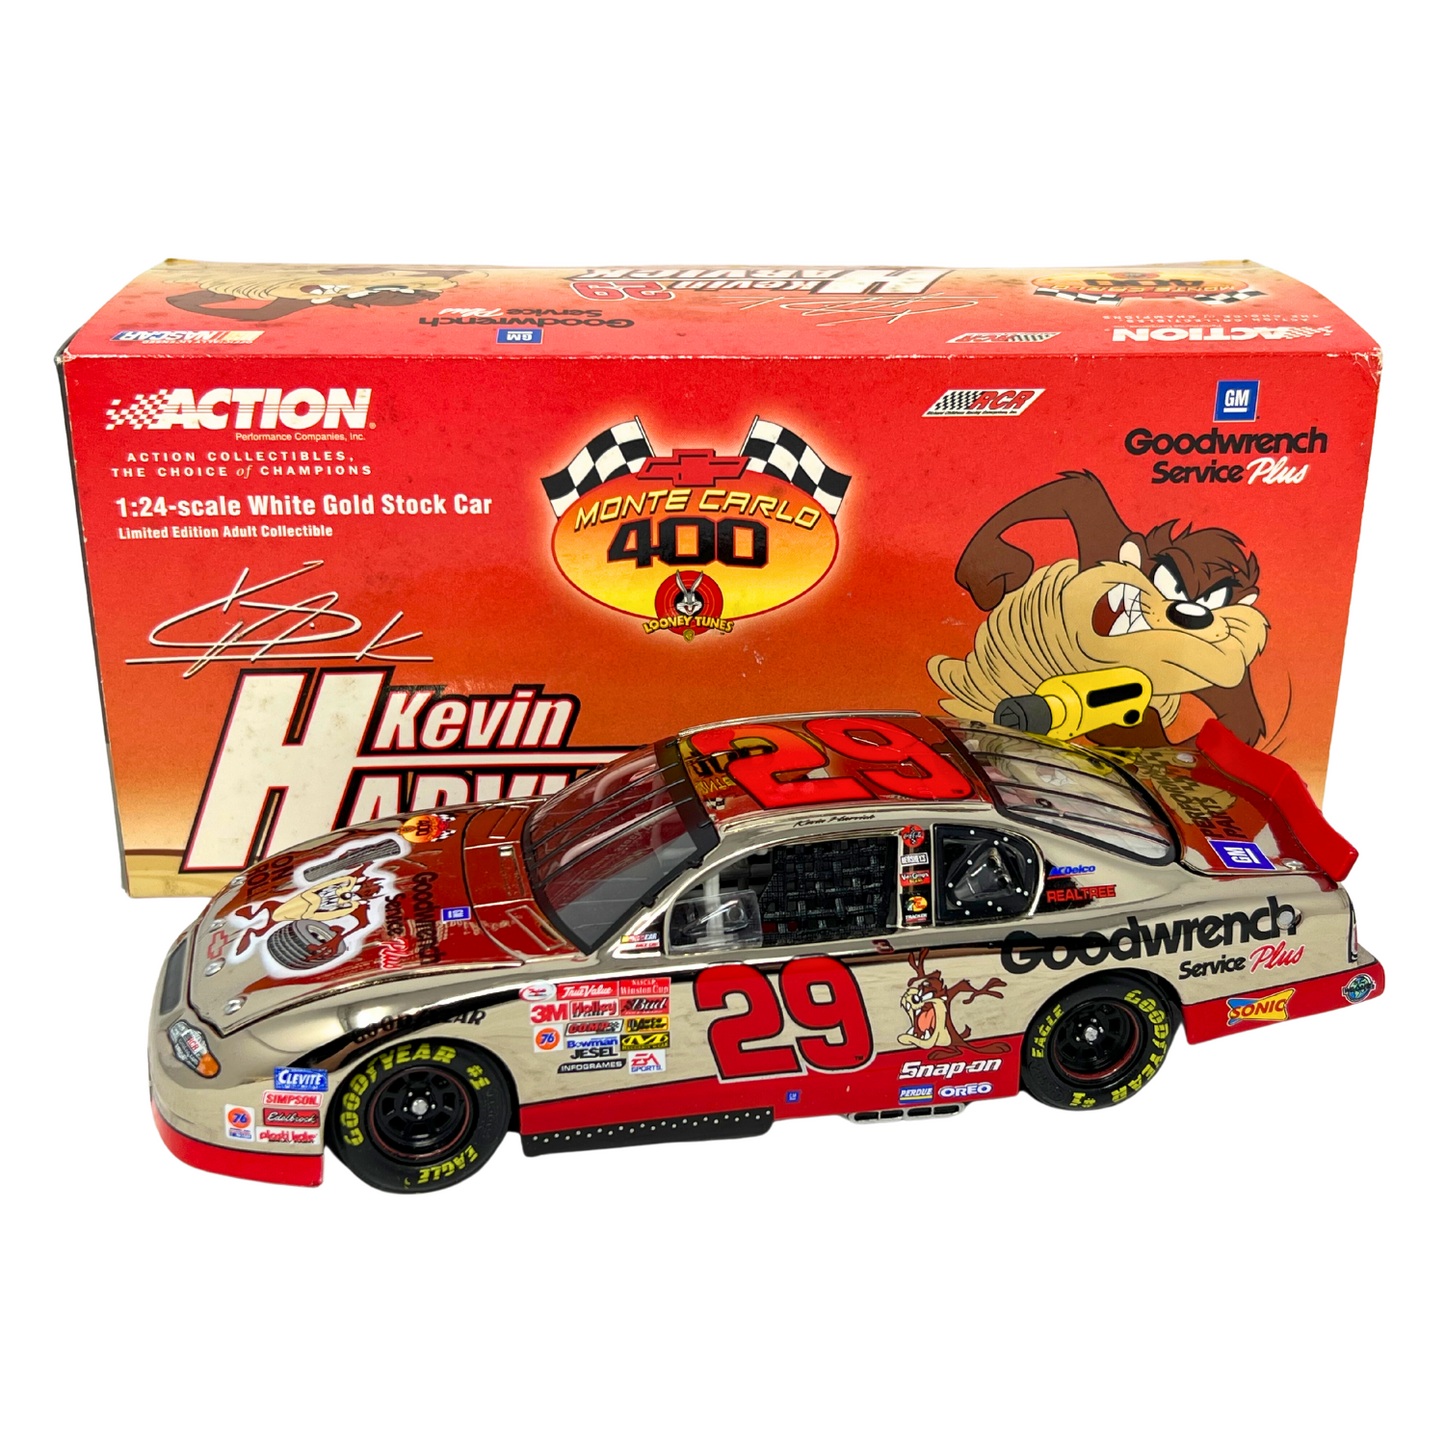 Action Nascar #29 Kevin Harvick Looney Tunes White Gold GM Dealers 1:24 Diecast